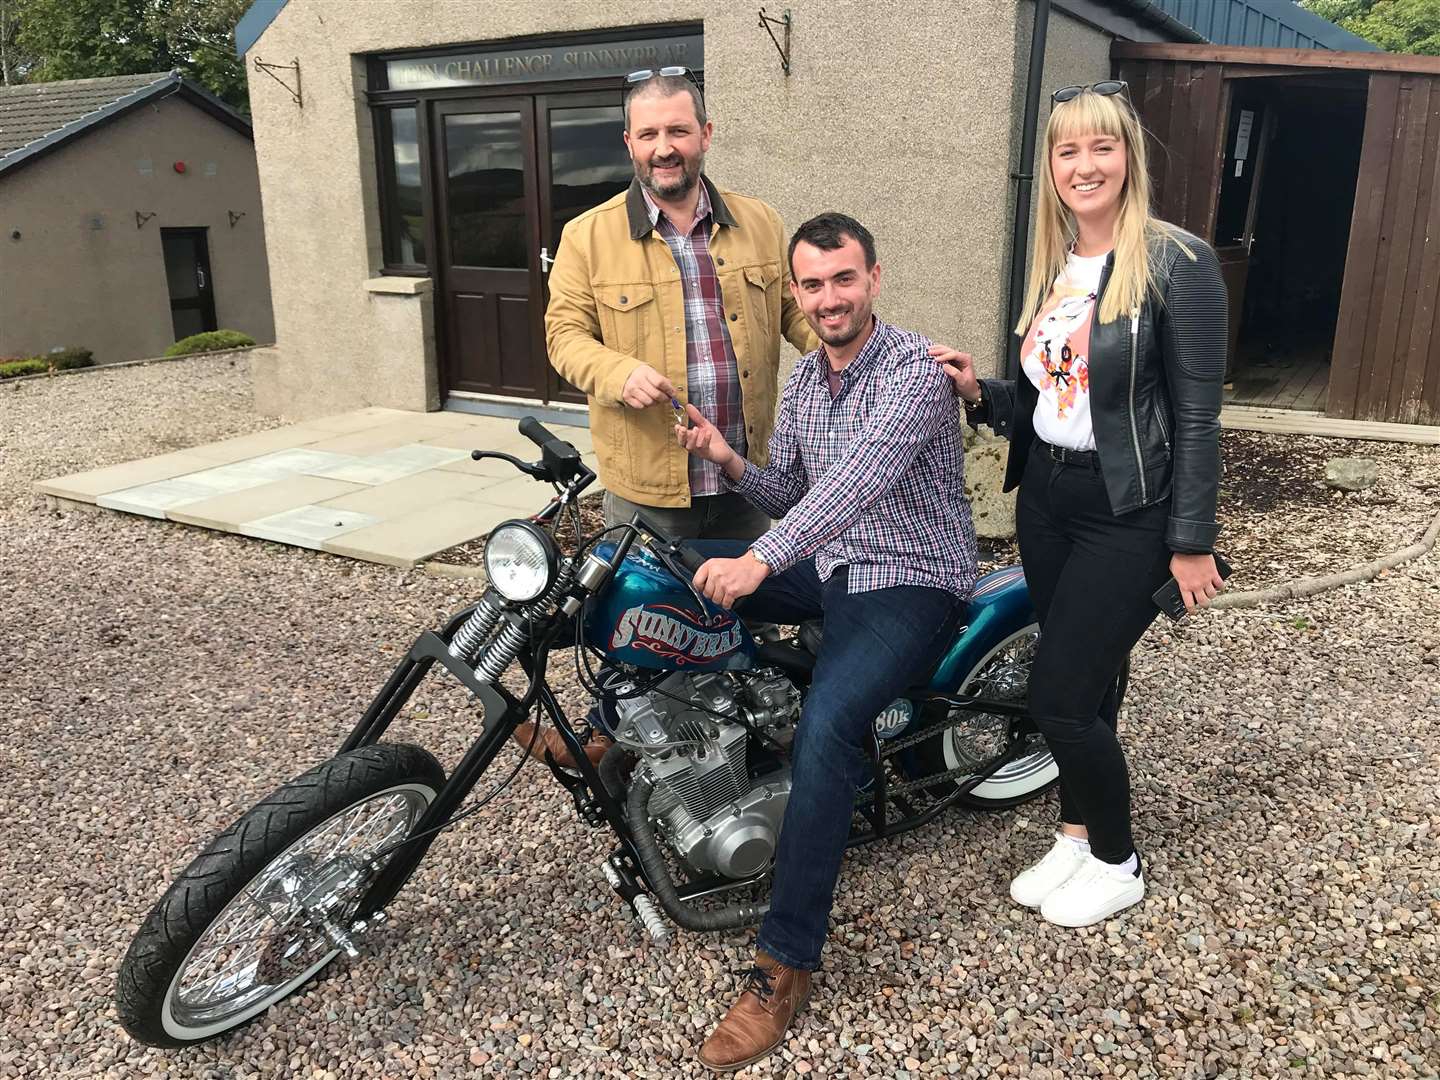 Teen Challenge's Gordon Cruden welcomed winner Matt Wilson and his partner Anna to collect the prize motorcycle.